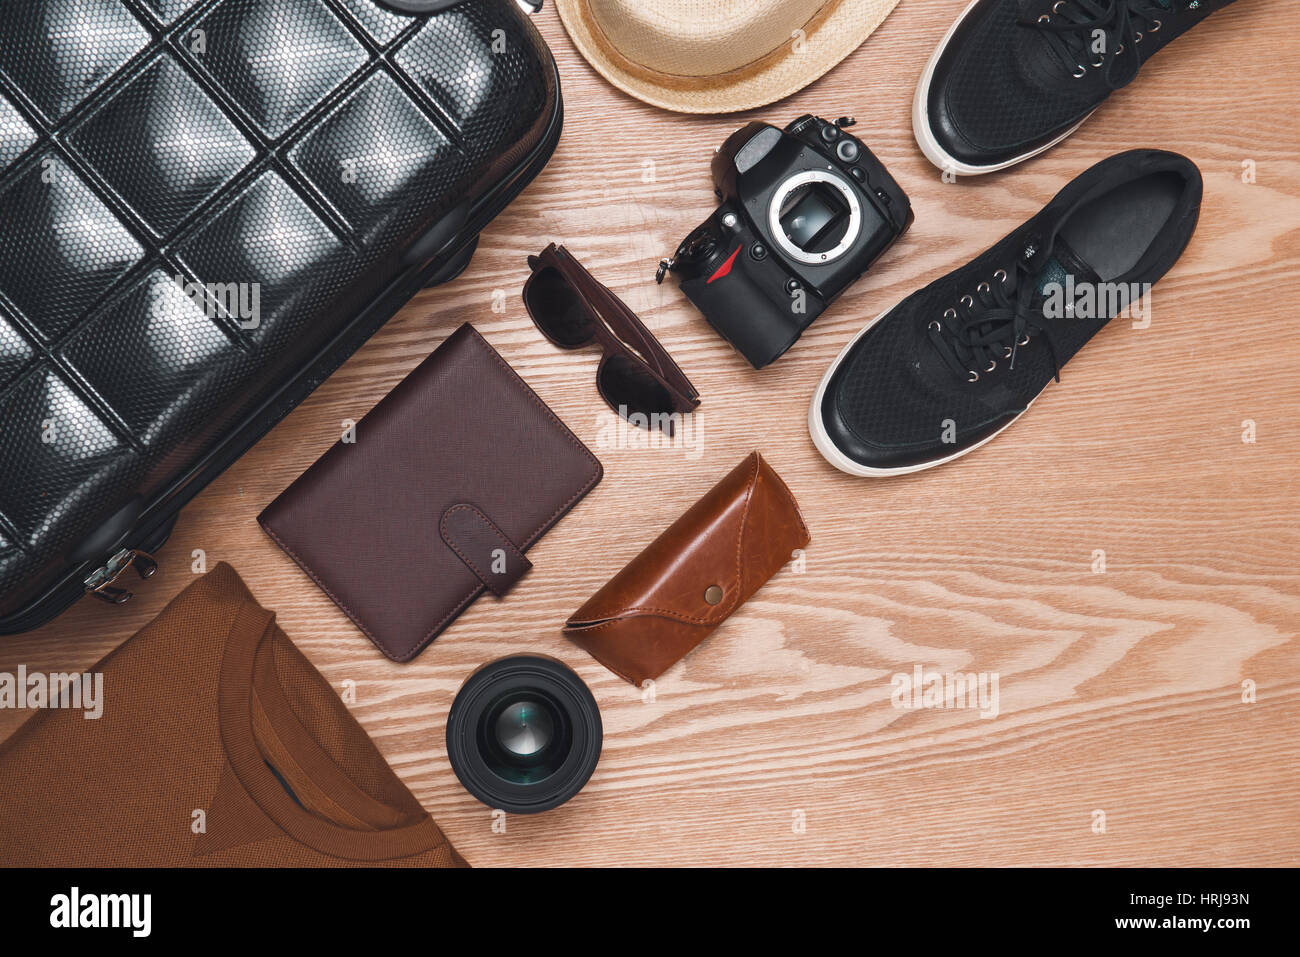 Vacations concept. Holiday suitcase. Ready for travel. Stock Photo